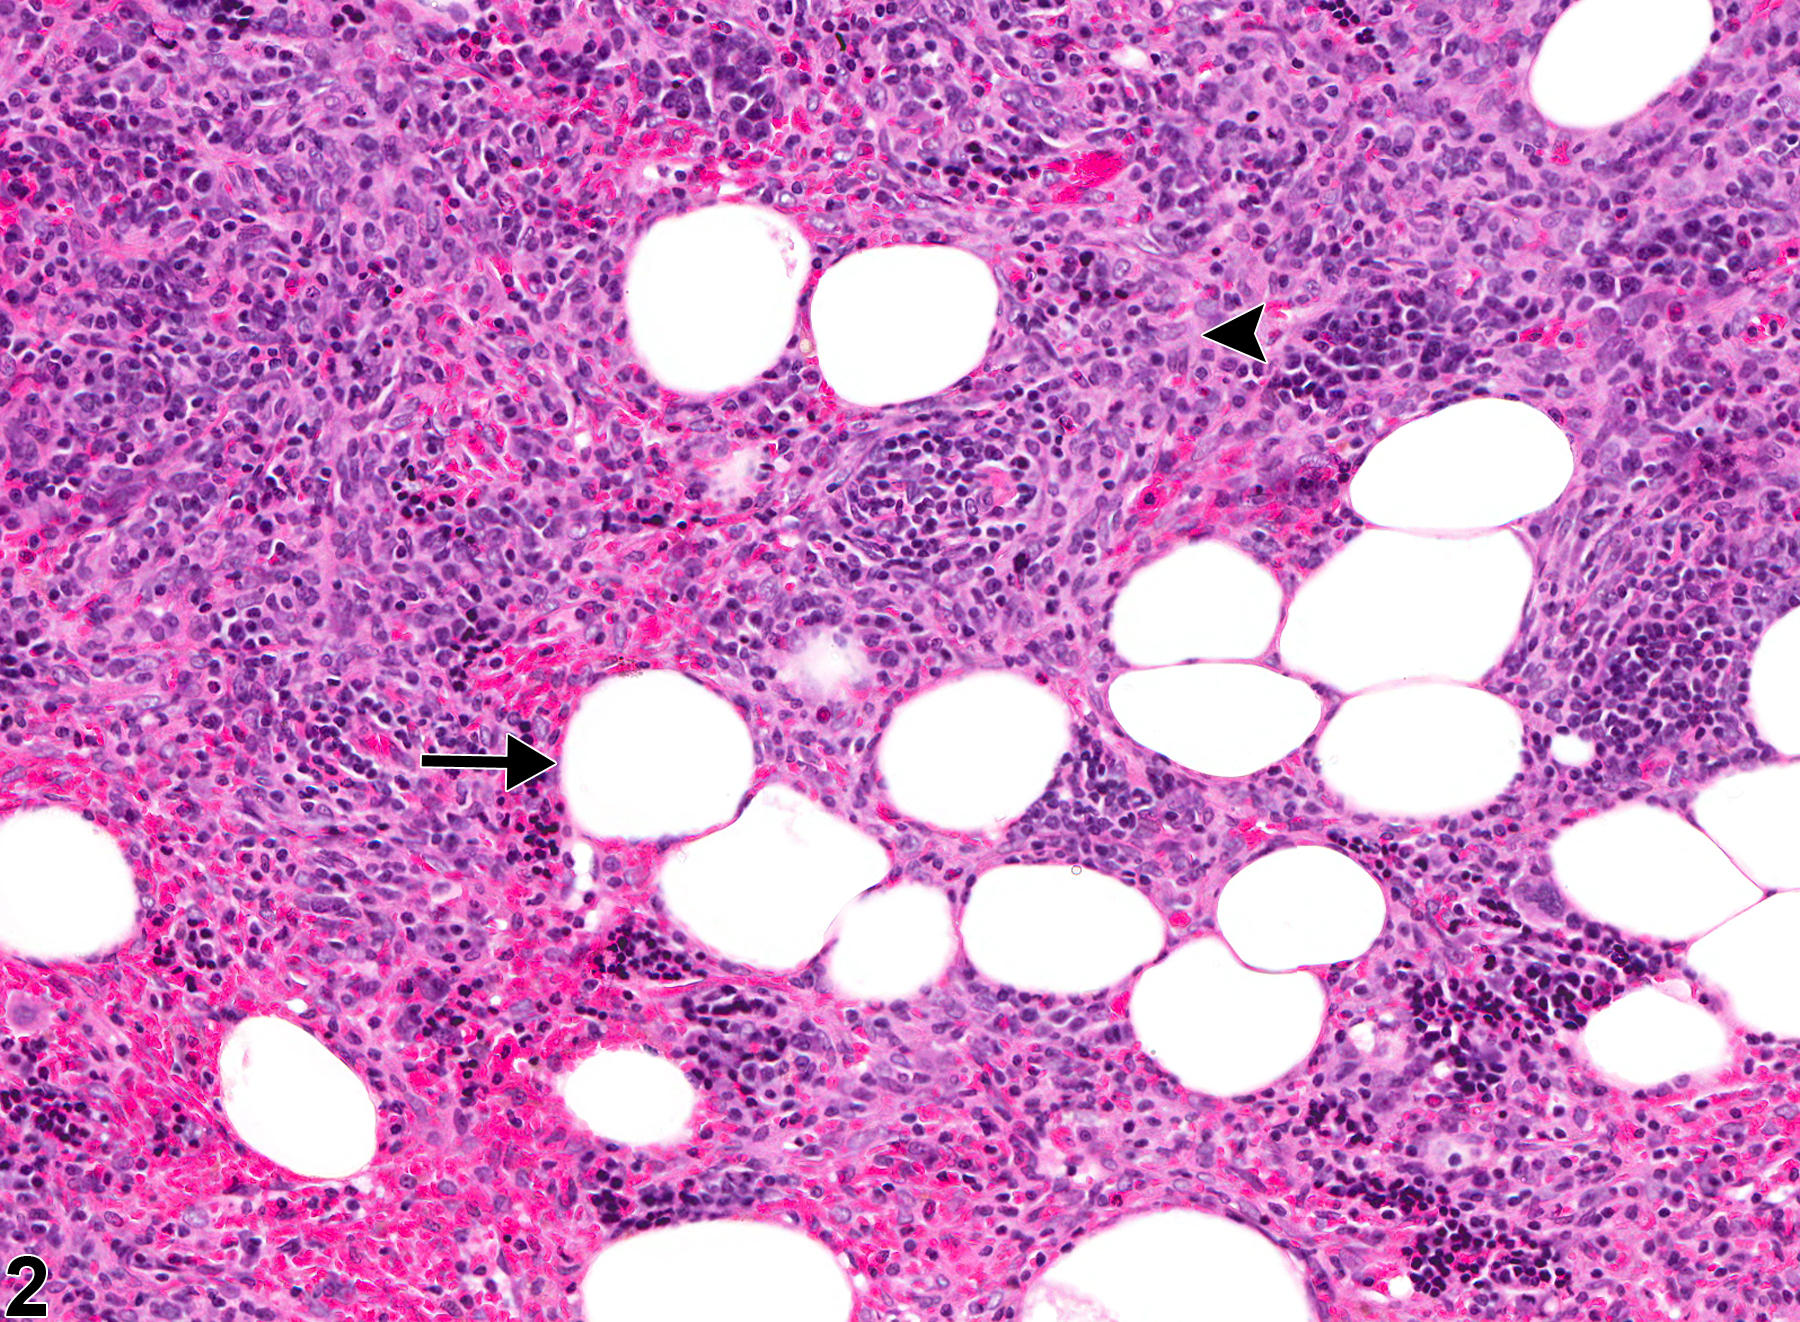 Image of adipocyte metaplasia in the spleen from a female F344/N rat in a chronic study